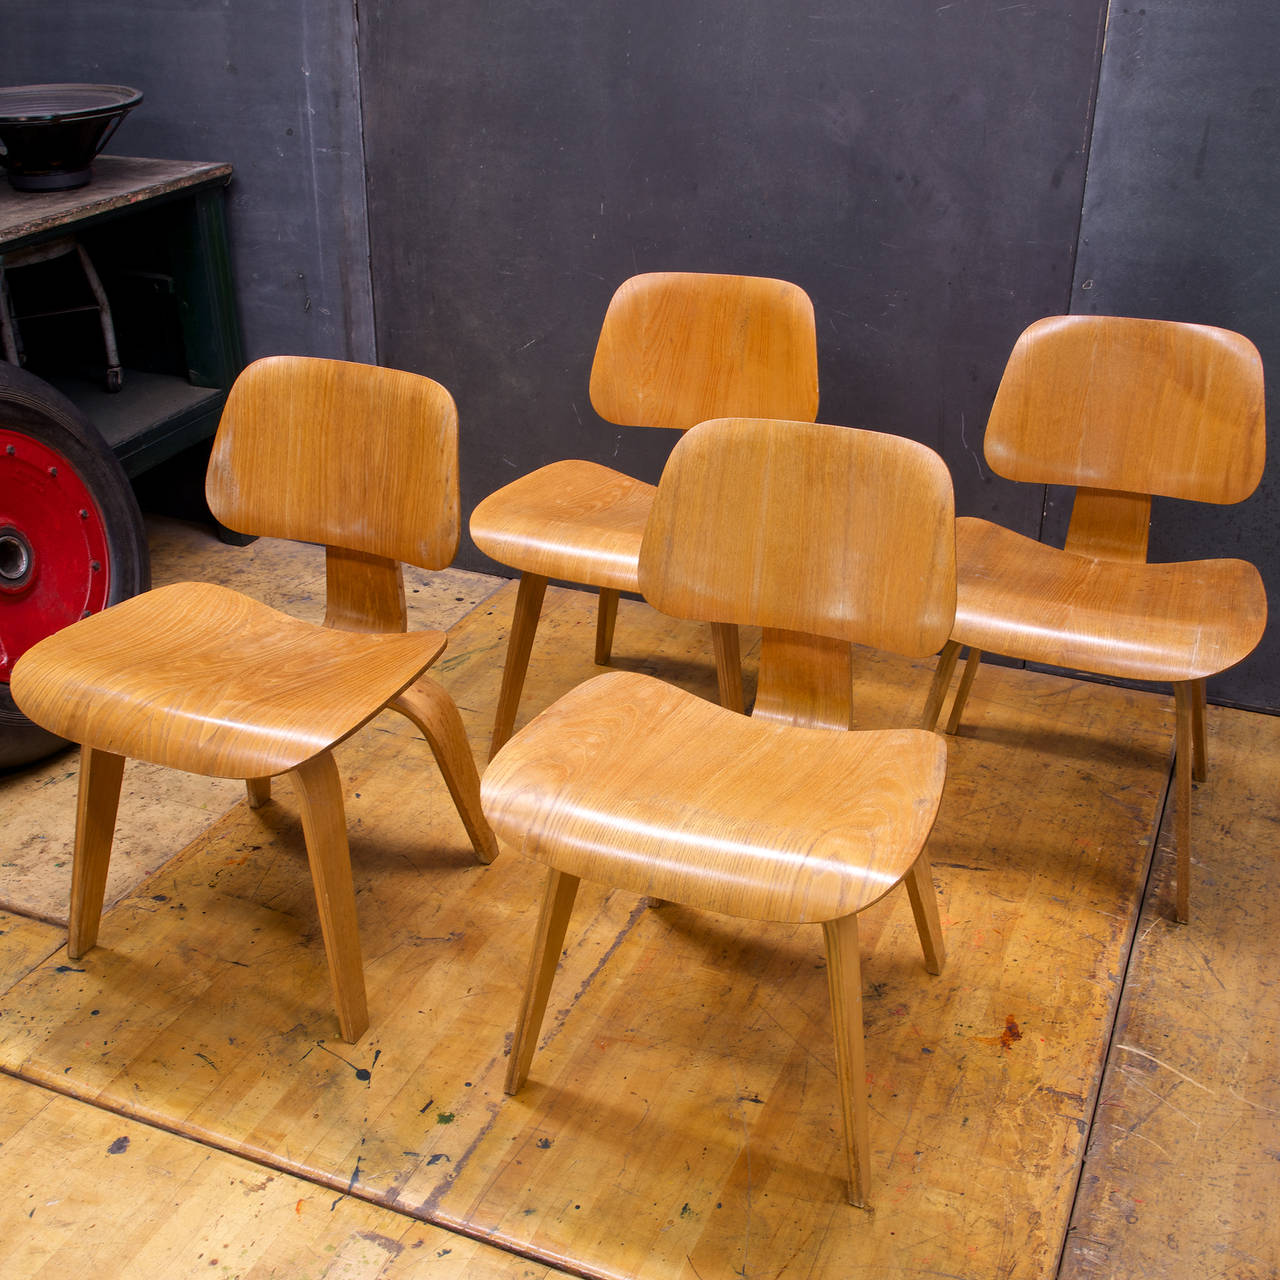 One of the first First Production runs of these Iconic Mid-Century Bentwood Chairs, with one of the Earliest Evans labels, in which all chairs retain. These DCW Chairs by Charles Eames for Herman Miller/Evans Plywood Division.  Estate Fresh,